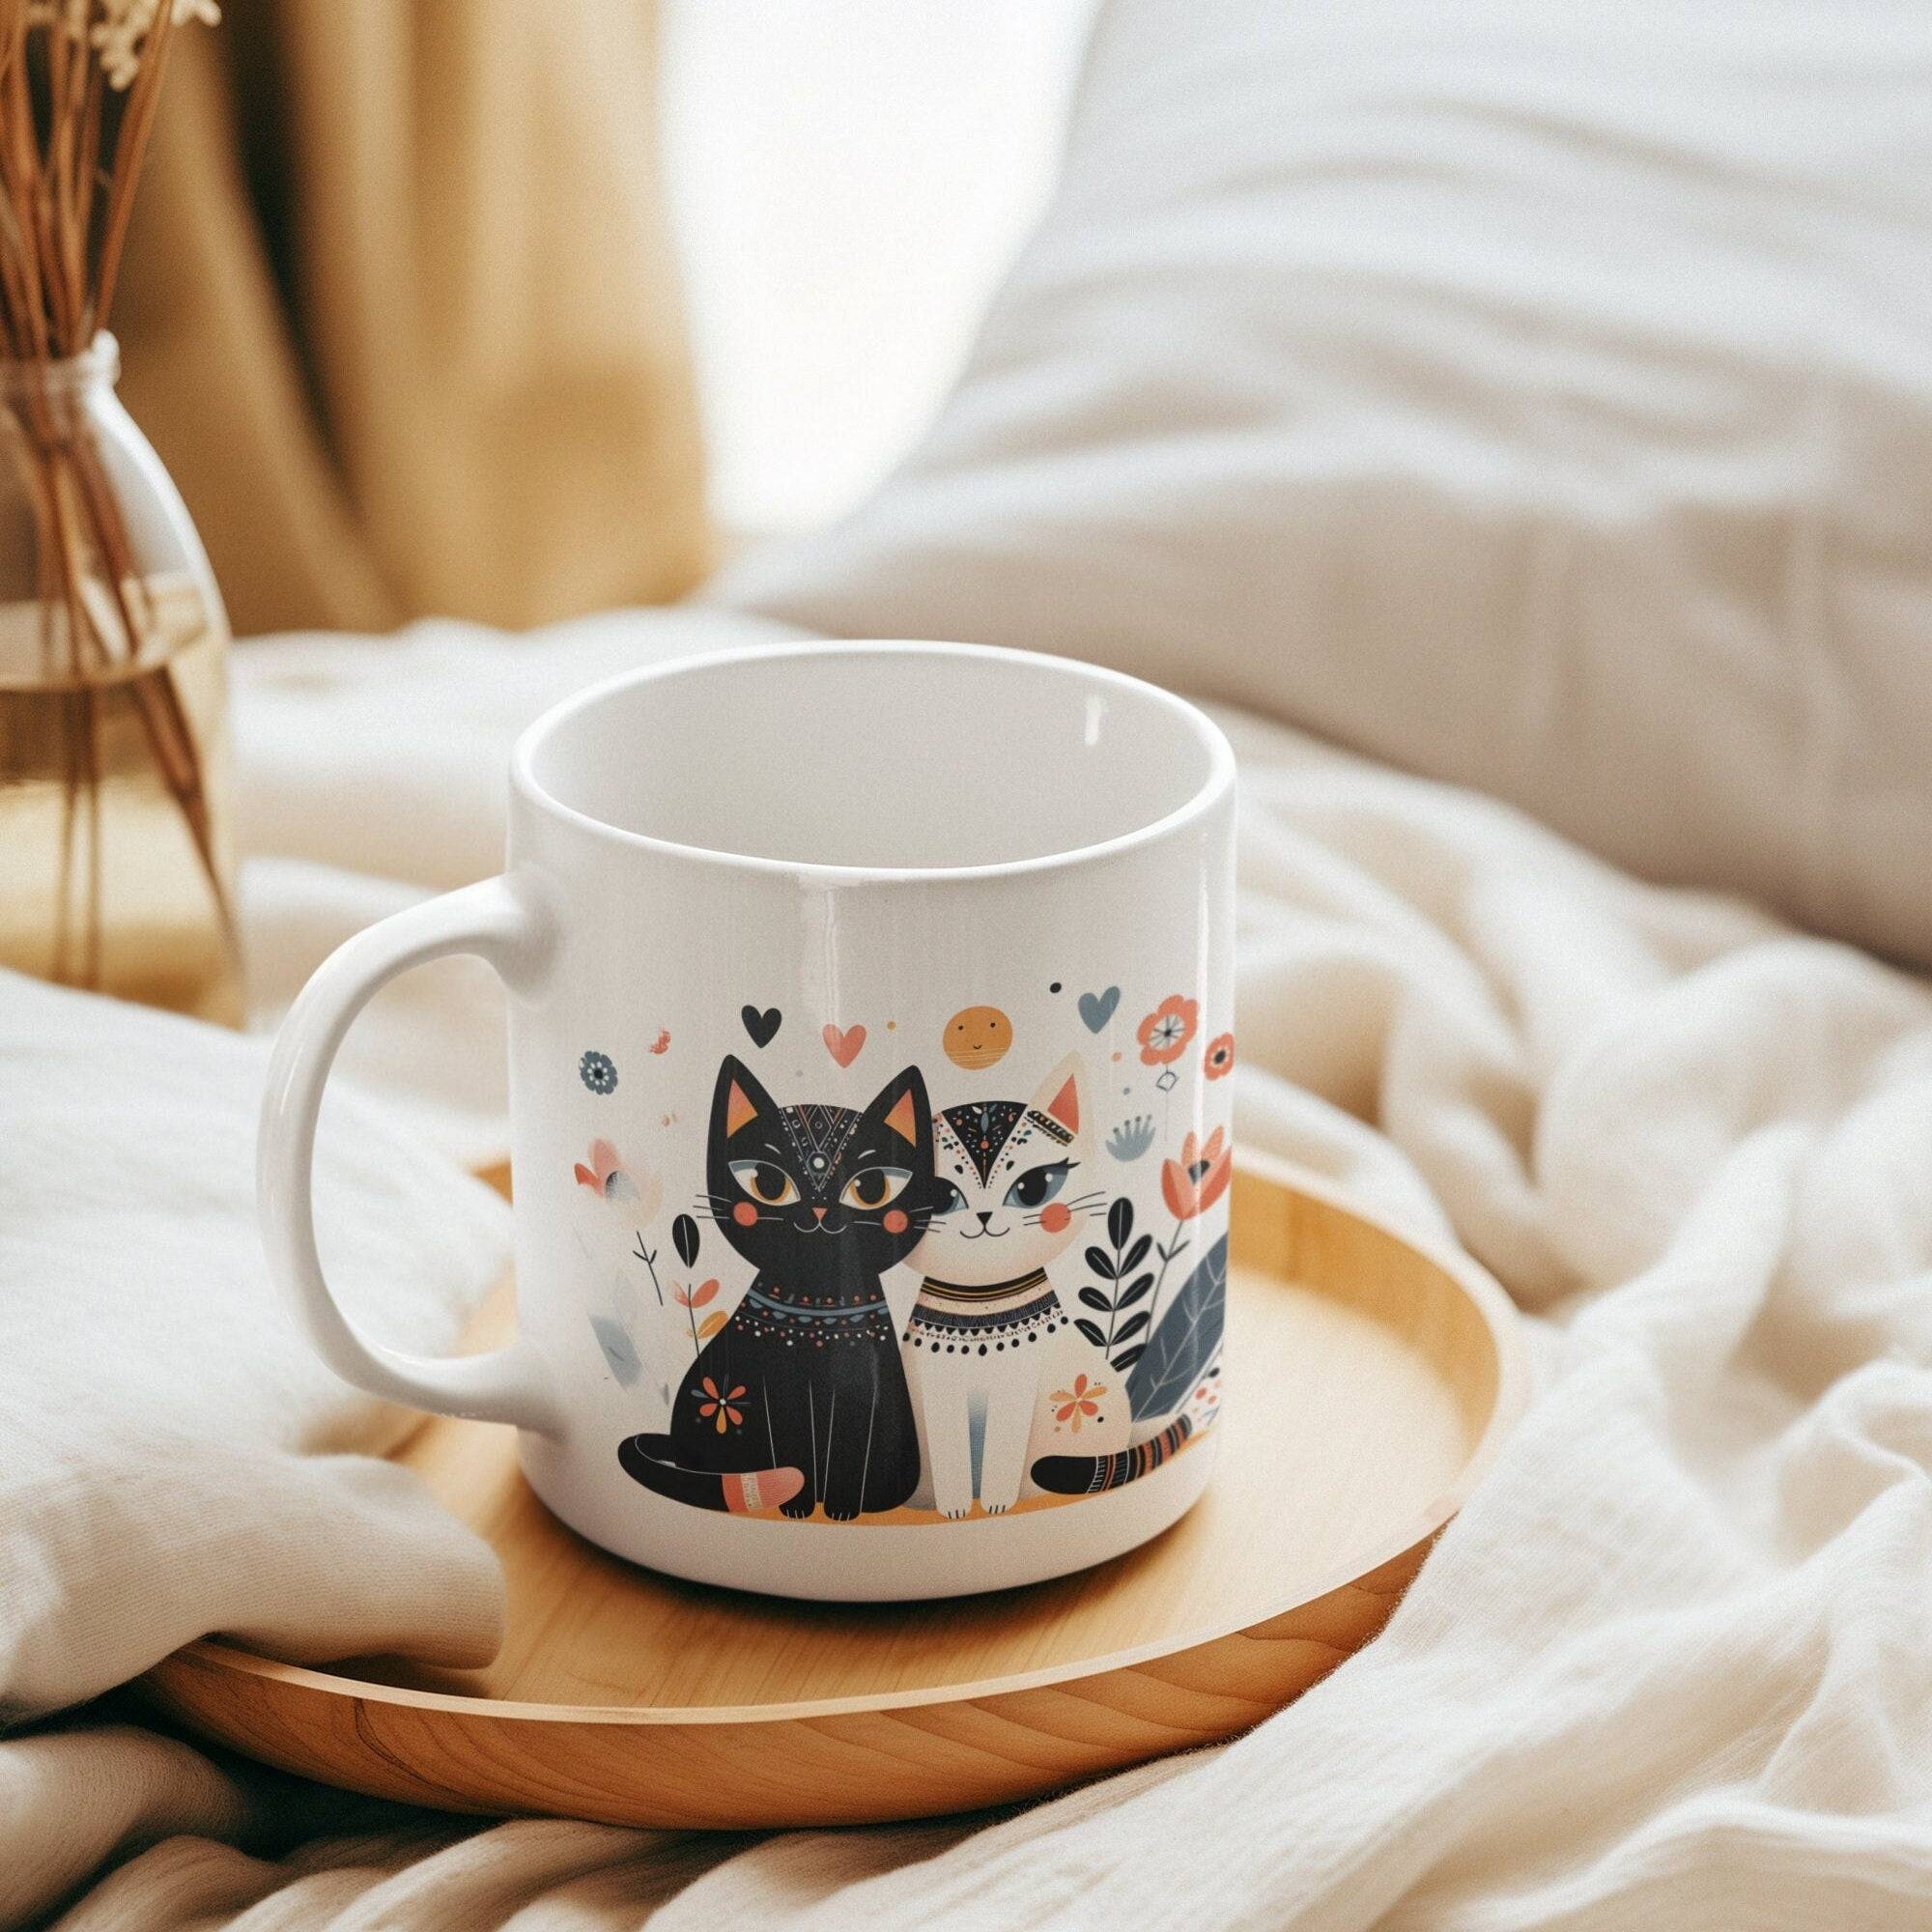 Cat Couple Mug - Minimalist Boho Style, Perfect Coffee Cup for Cat Lovers, Unique Anniversary Gift Littlecutiepaws